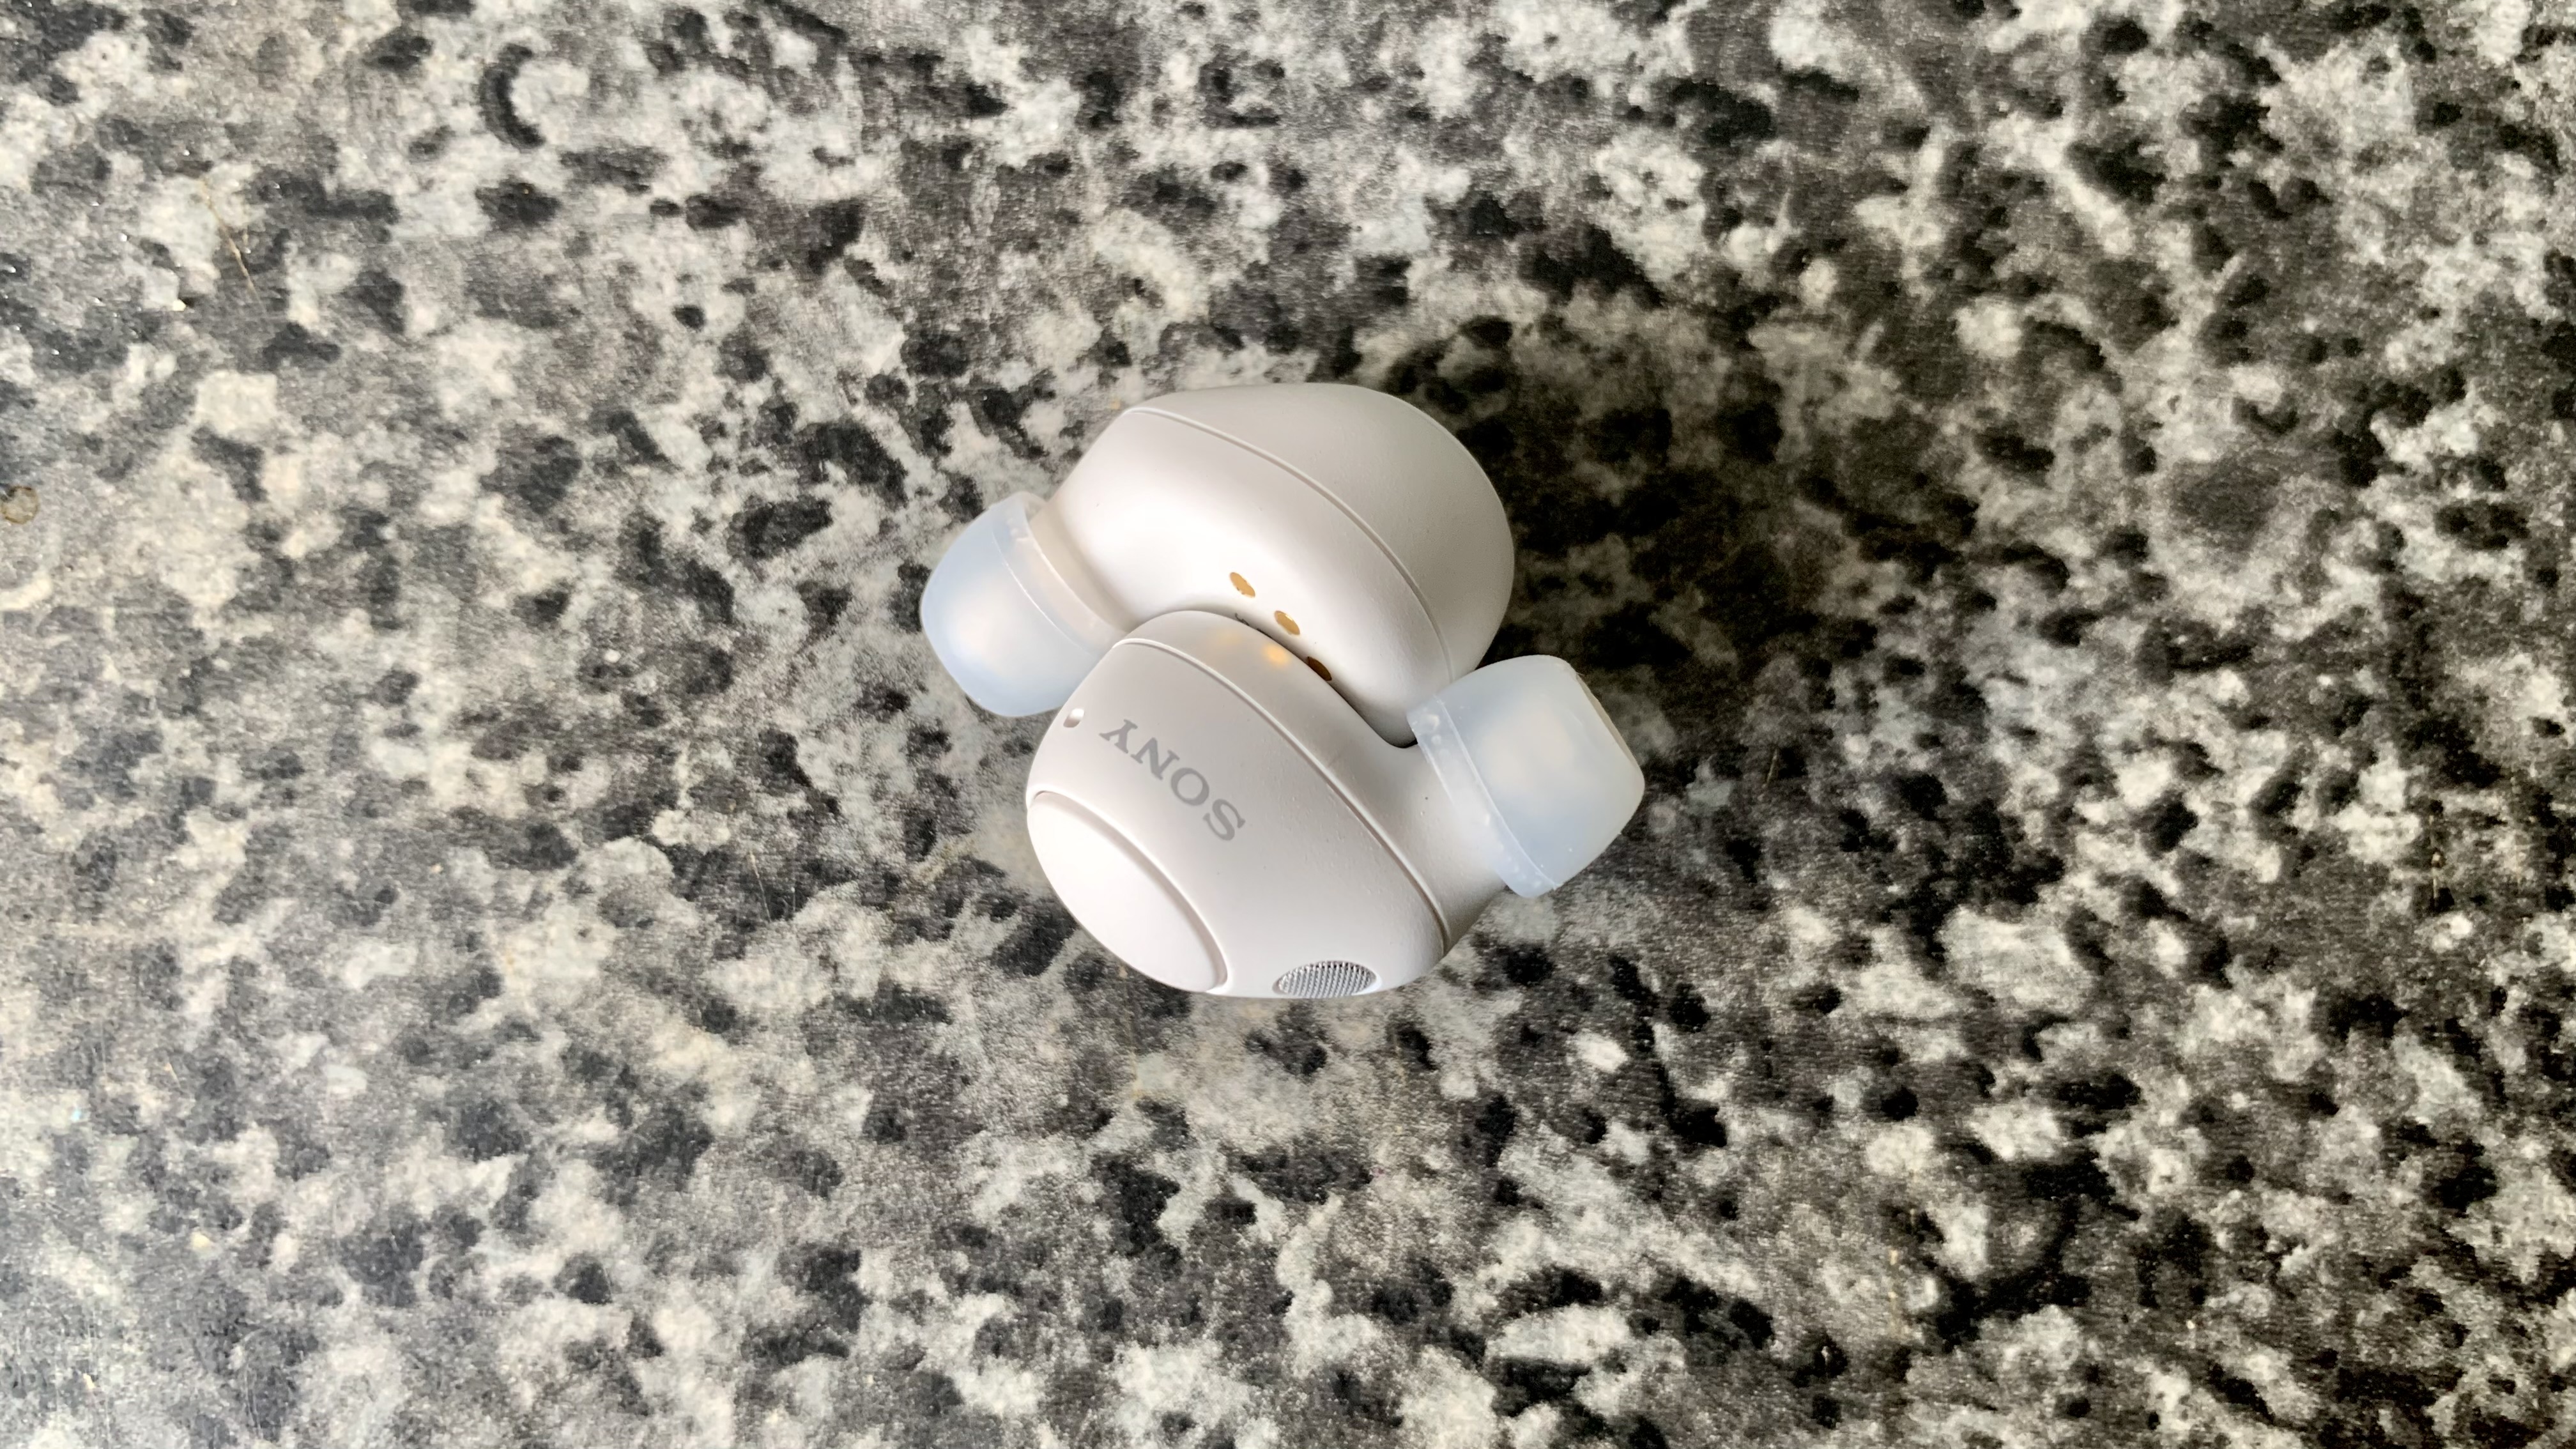 Sony WF-C700N earbuds on gray background